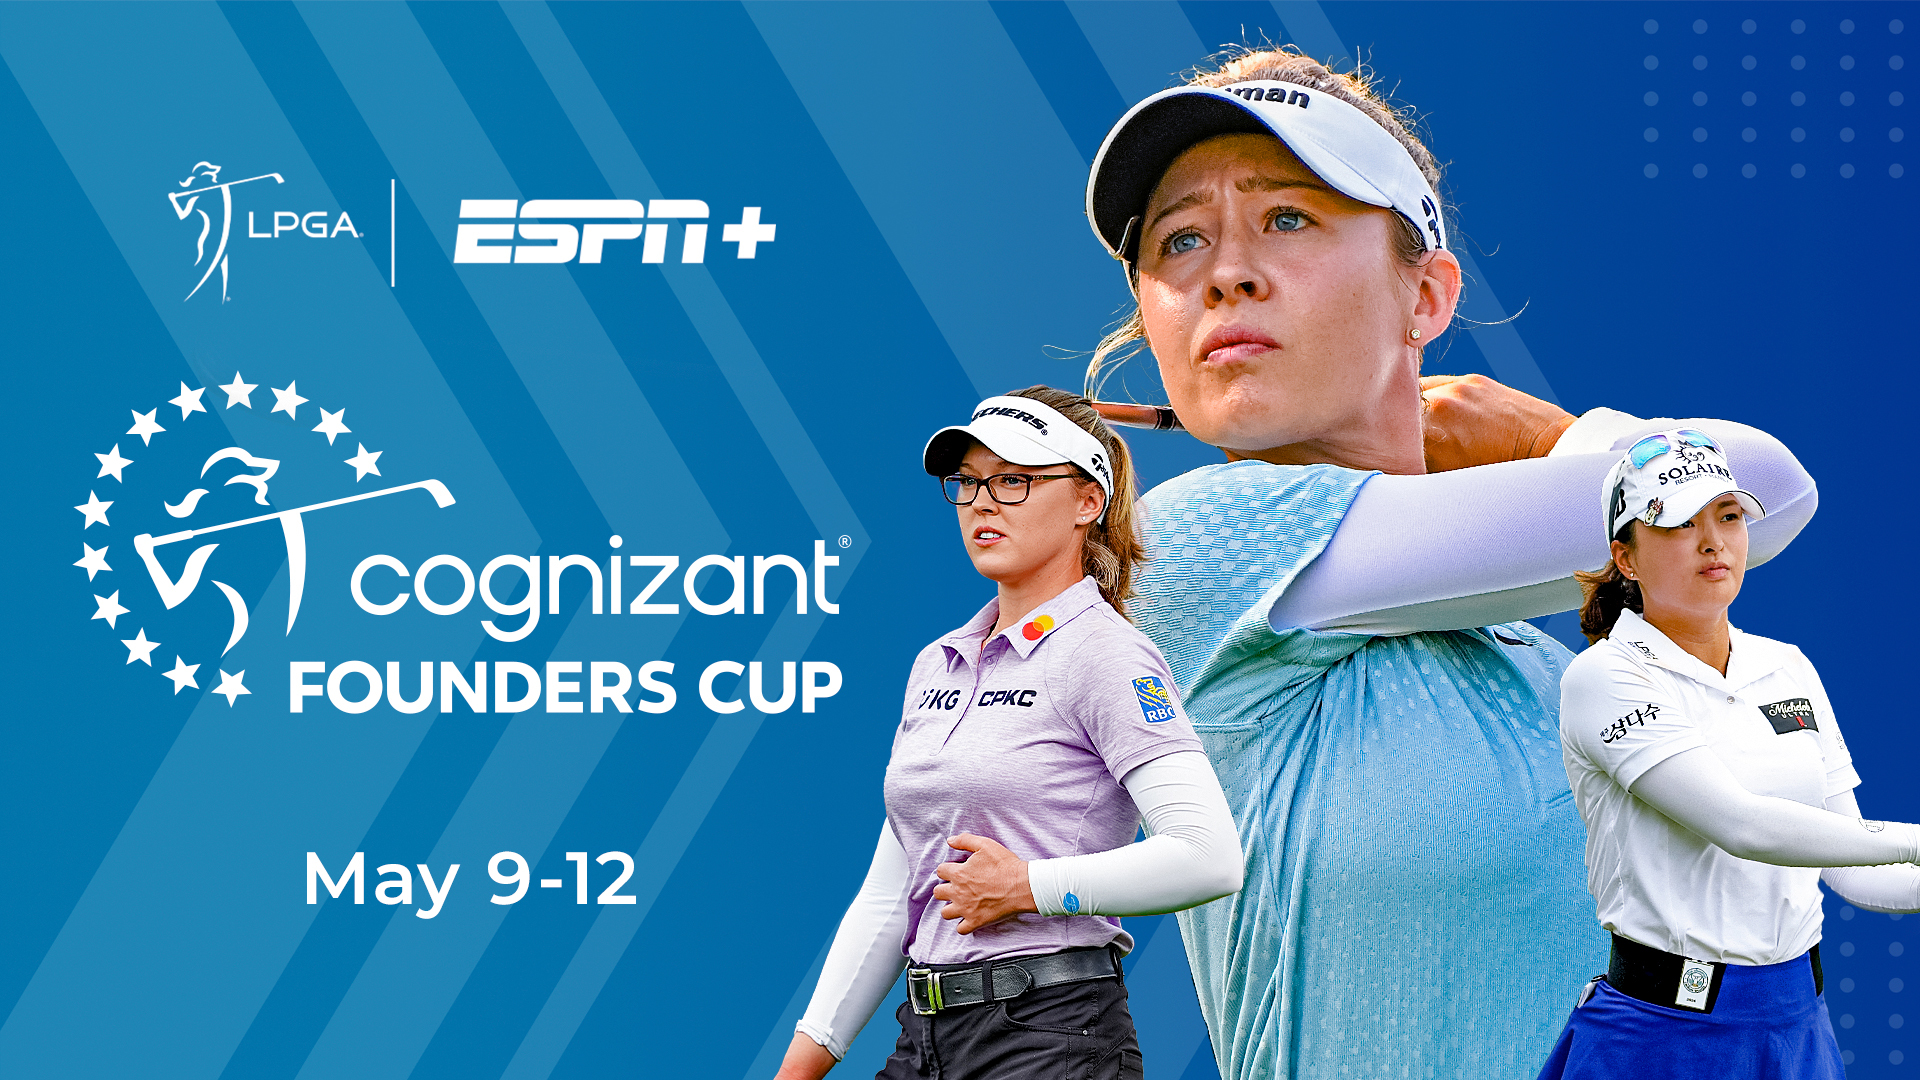 Espn To Stream Featured Groups Coverage At The Cognizant Founders Cup Lpga Ladies